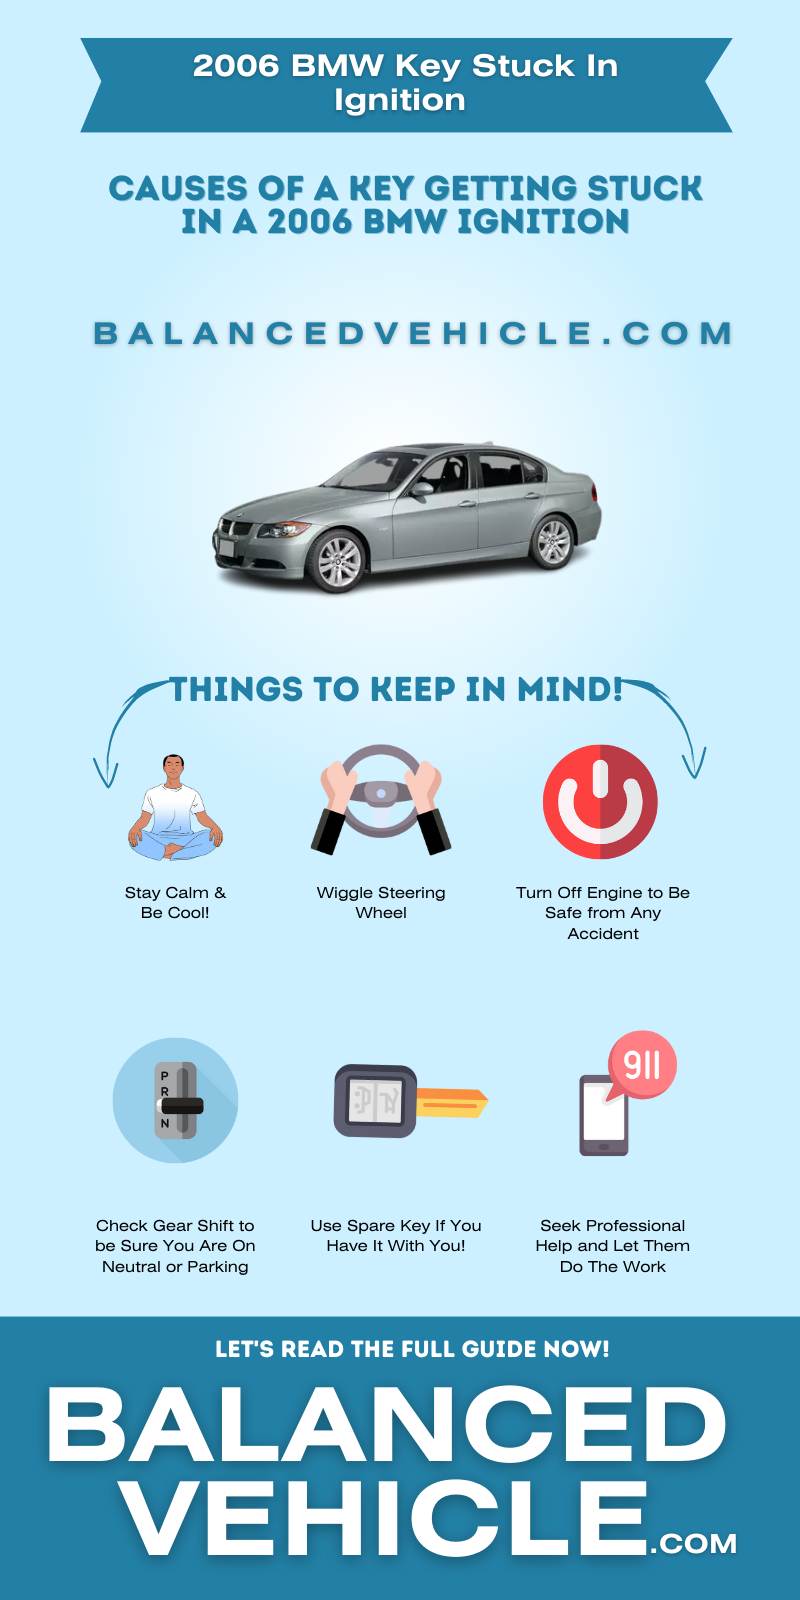 2006 BMW Key Stuck In Ignition - Infographic